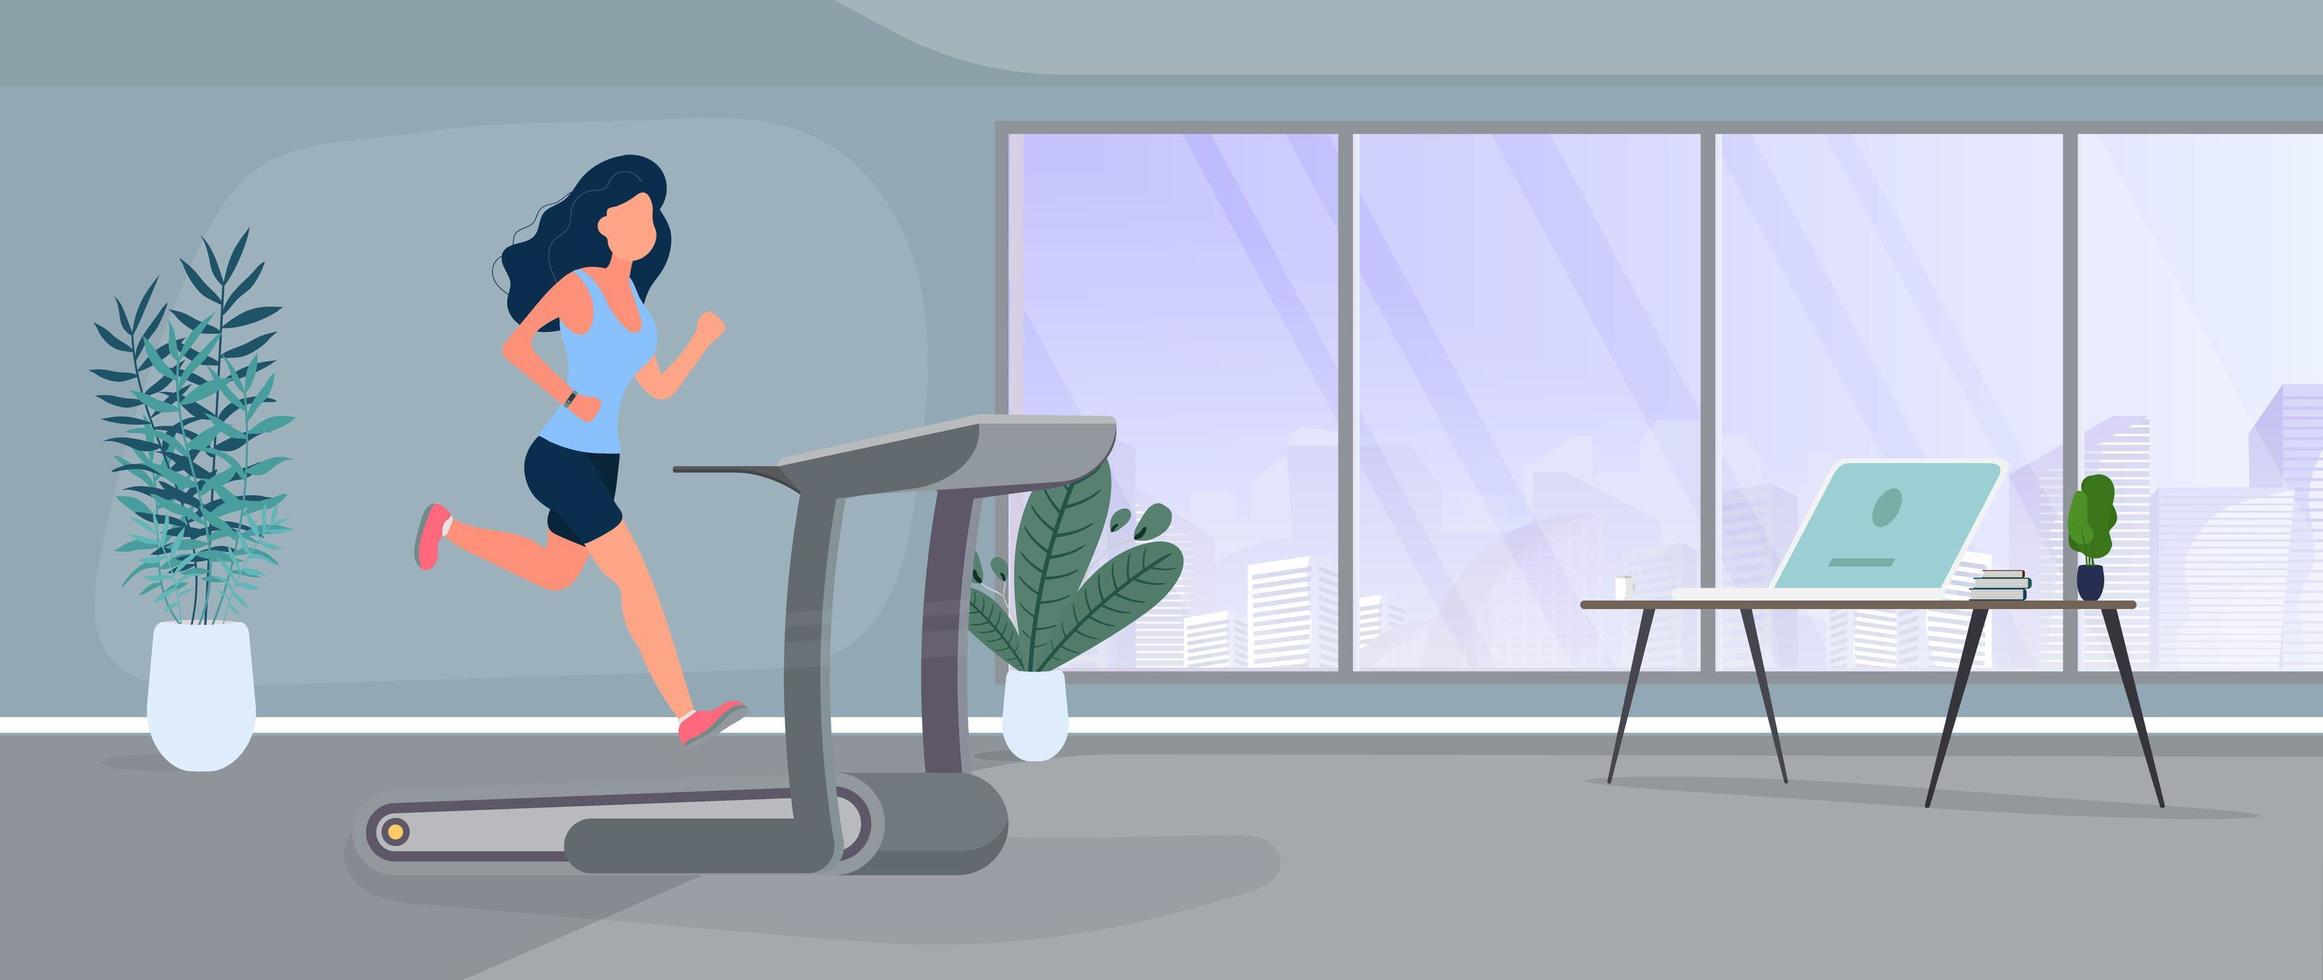 Girl runs on a treadmill. The girl is engaged in a running simulator. The concept of sport and healthy lifestyle. Gym, exercise machine. Vector. vector